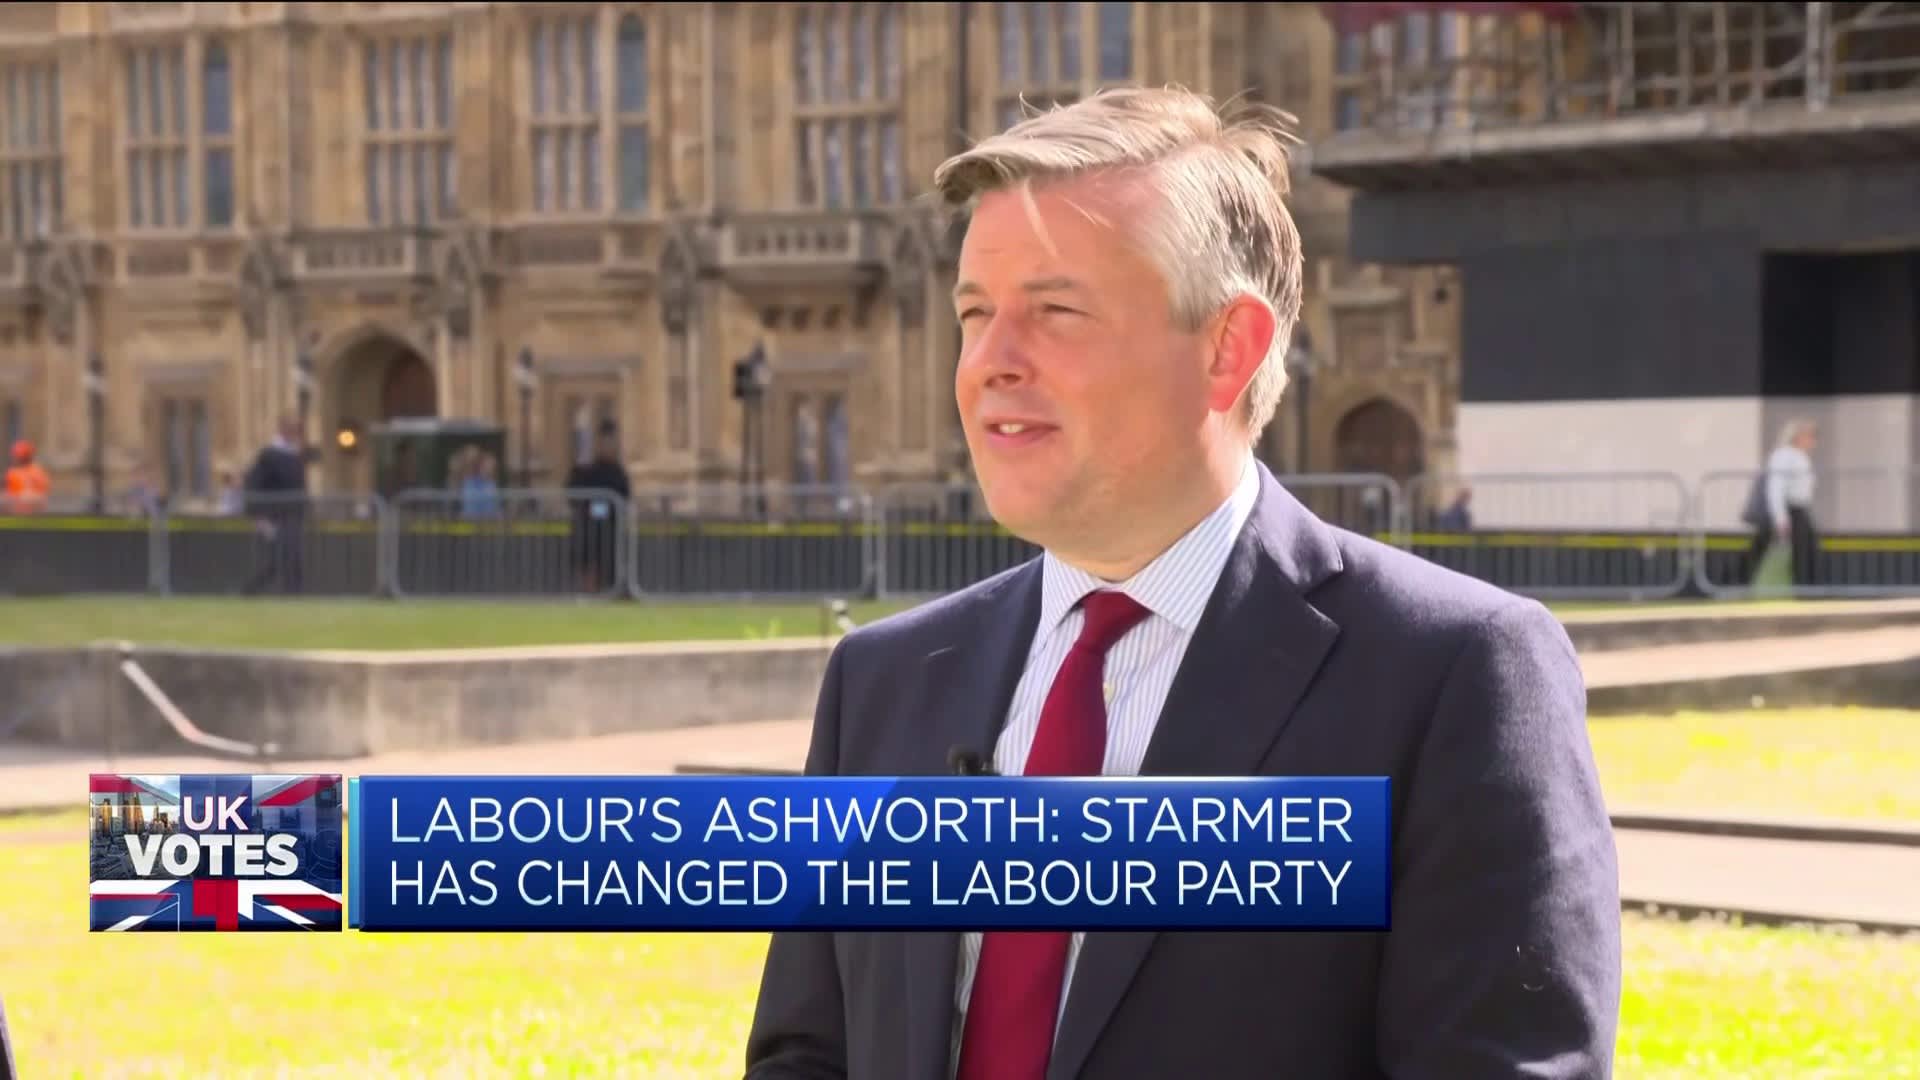 Keir Starmer ready to change the country, Labour's Ashworth says